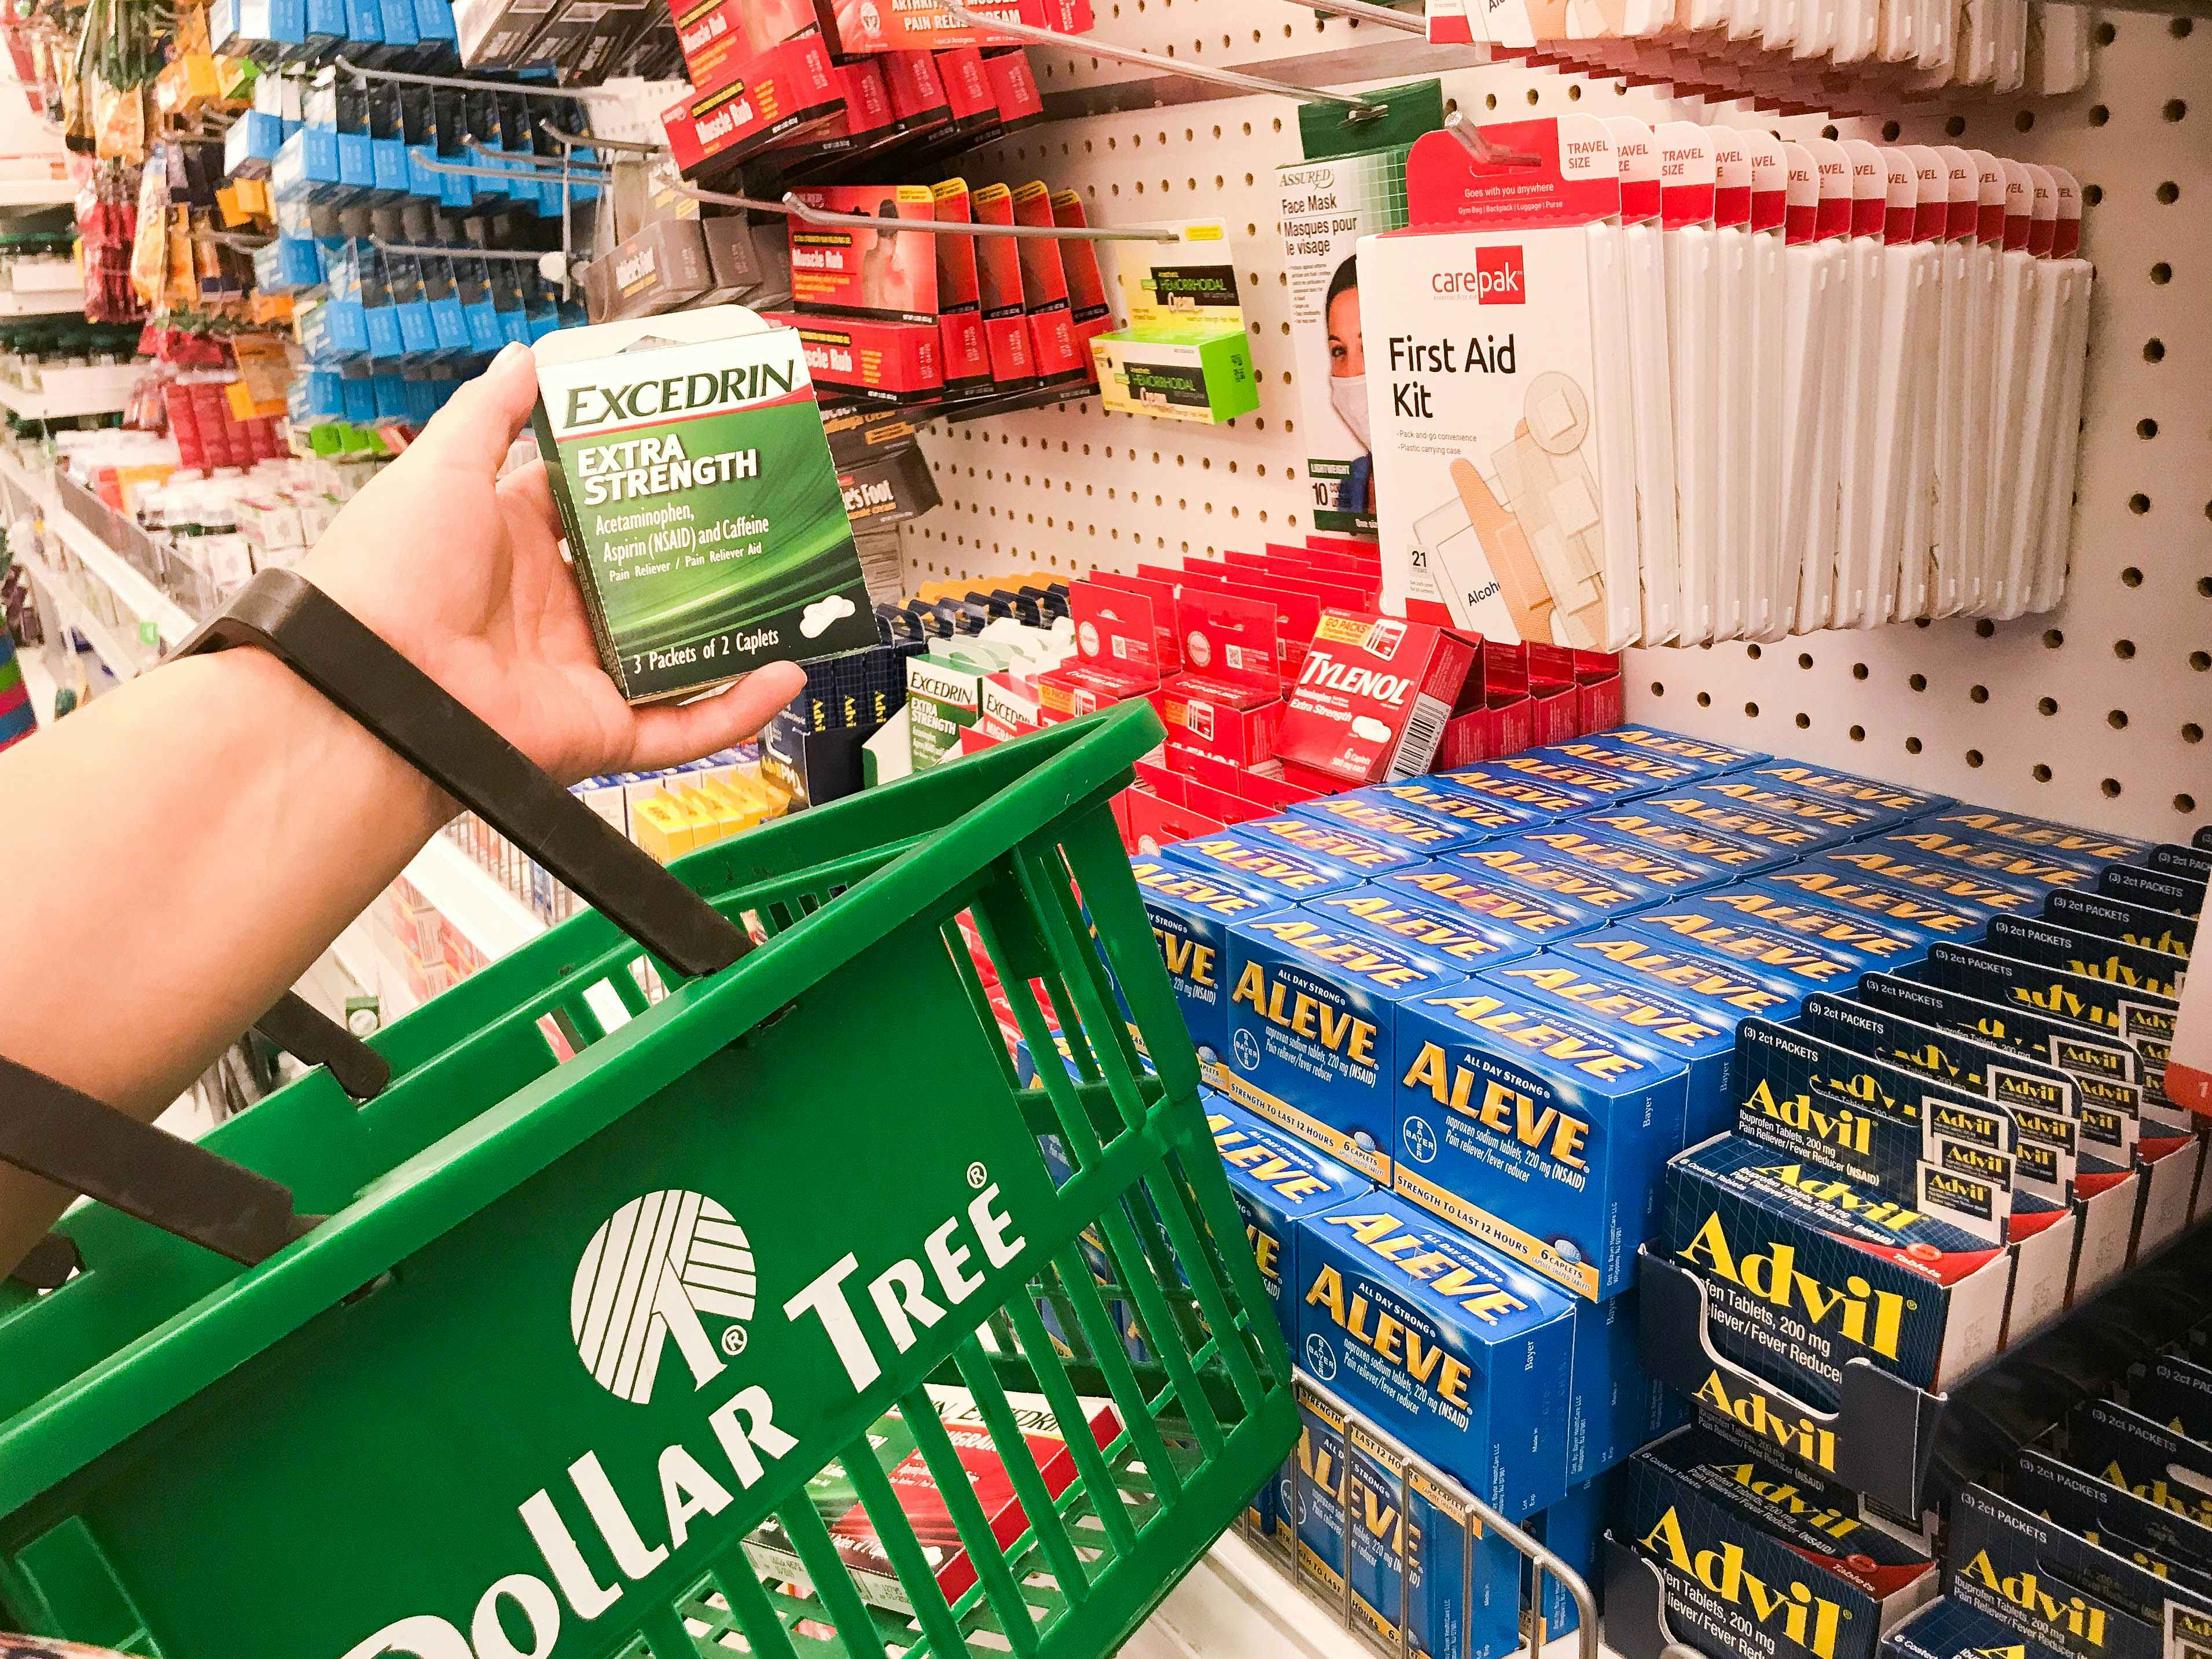 woman shopping at Dollar Tree holding basket and excedrin product